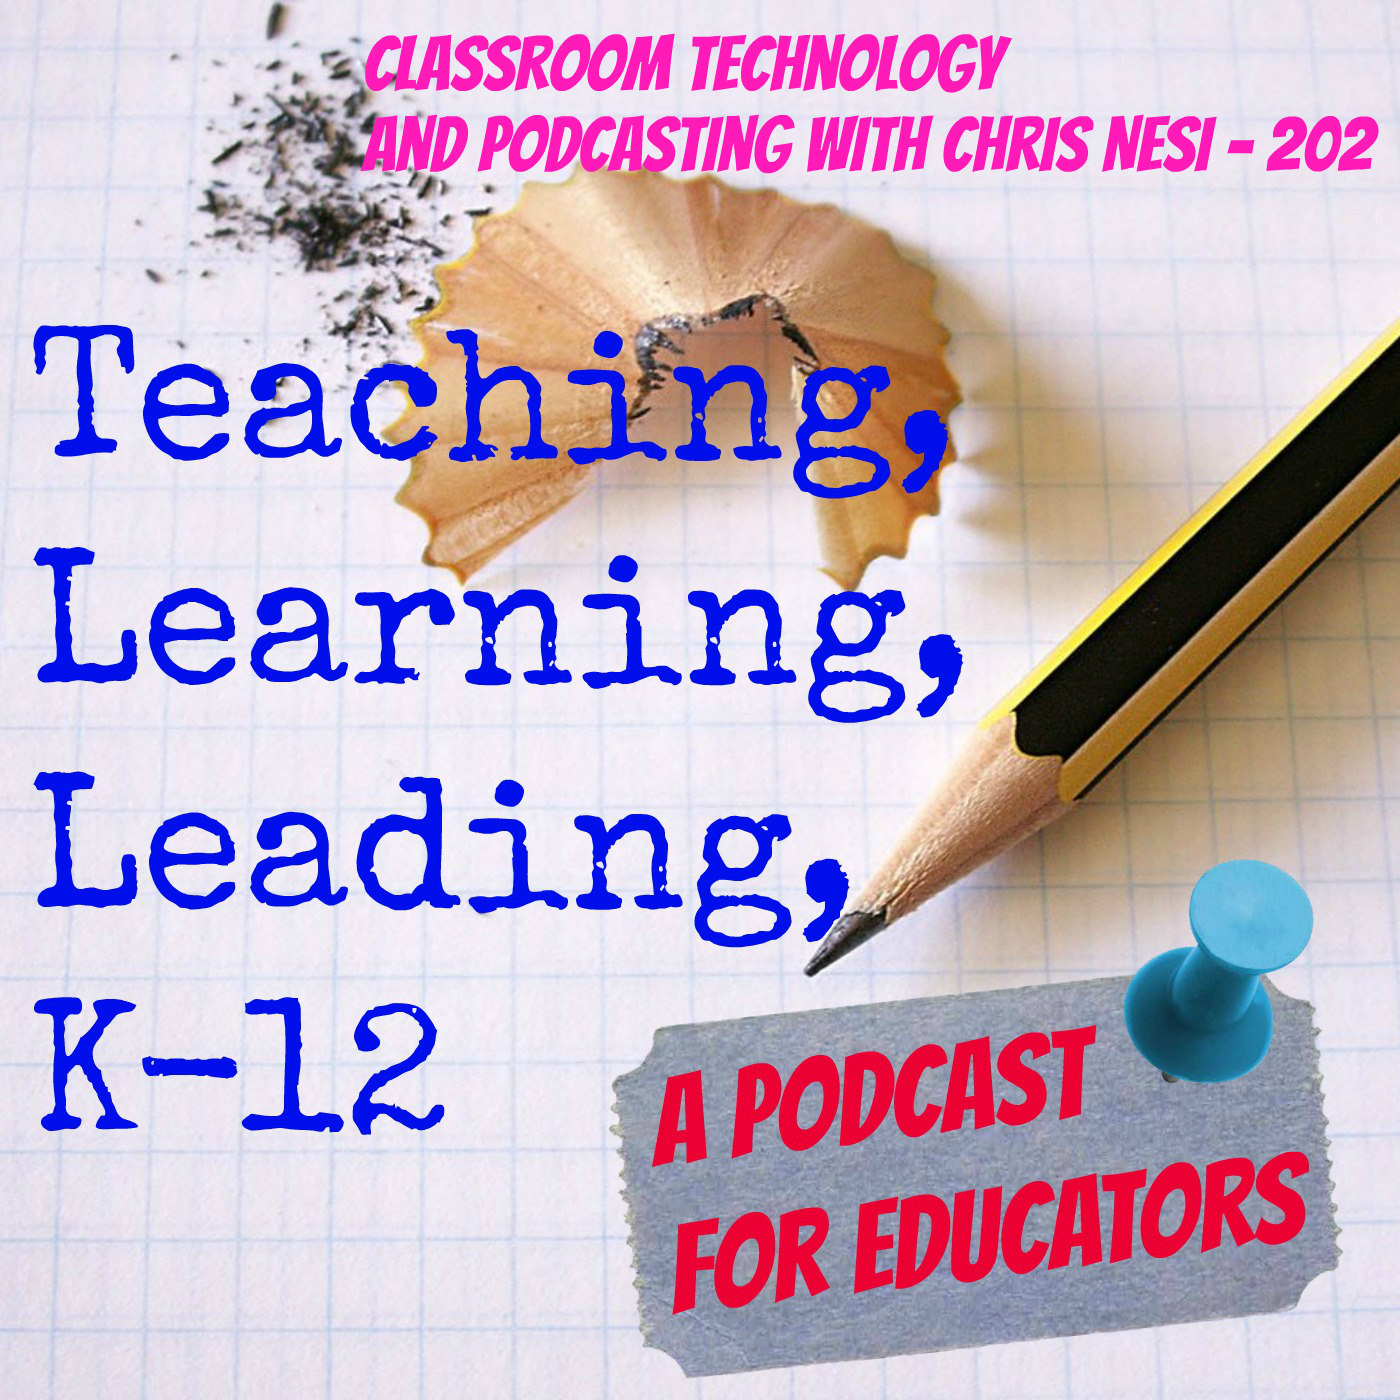 Classroom Technology and Podcasting with Chris Nesi - 202 Image